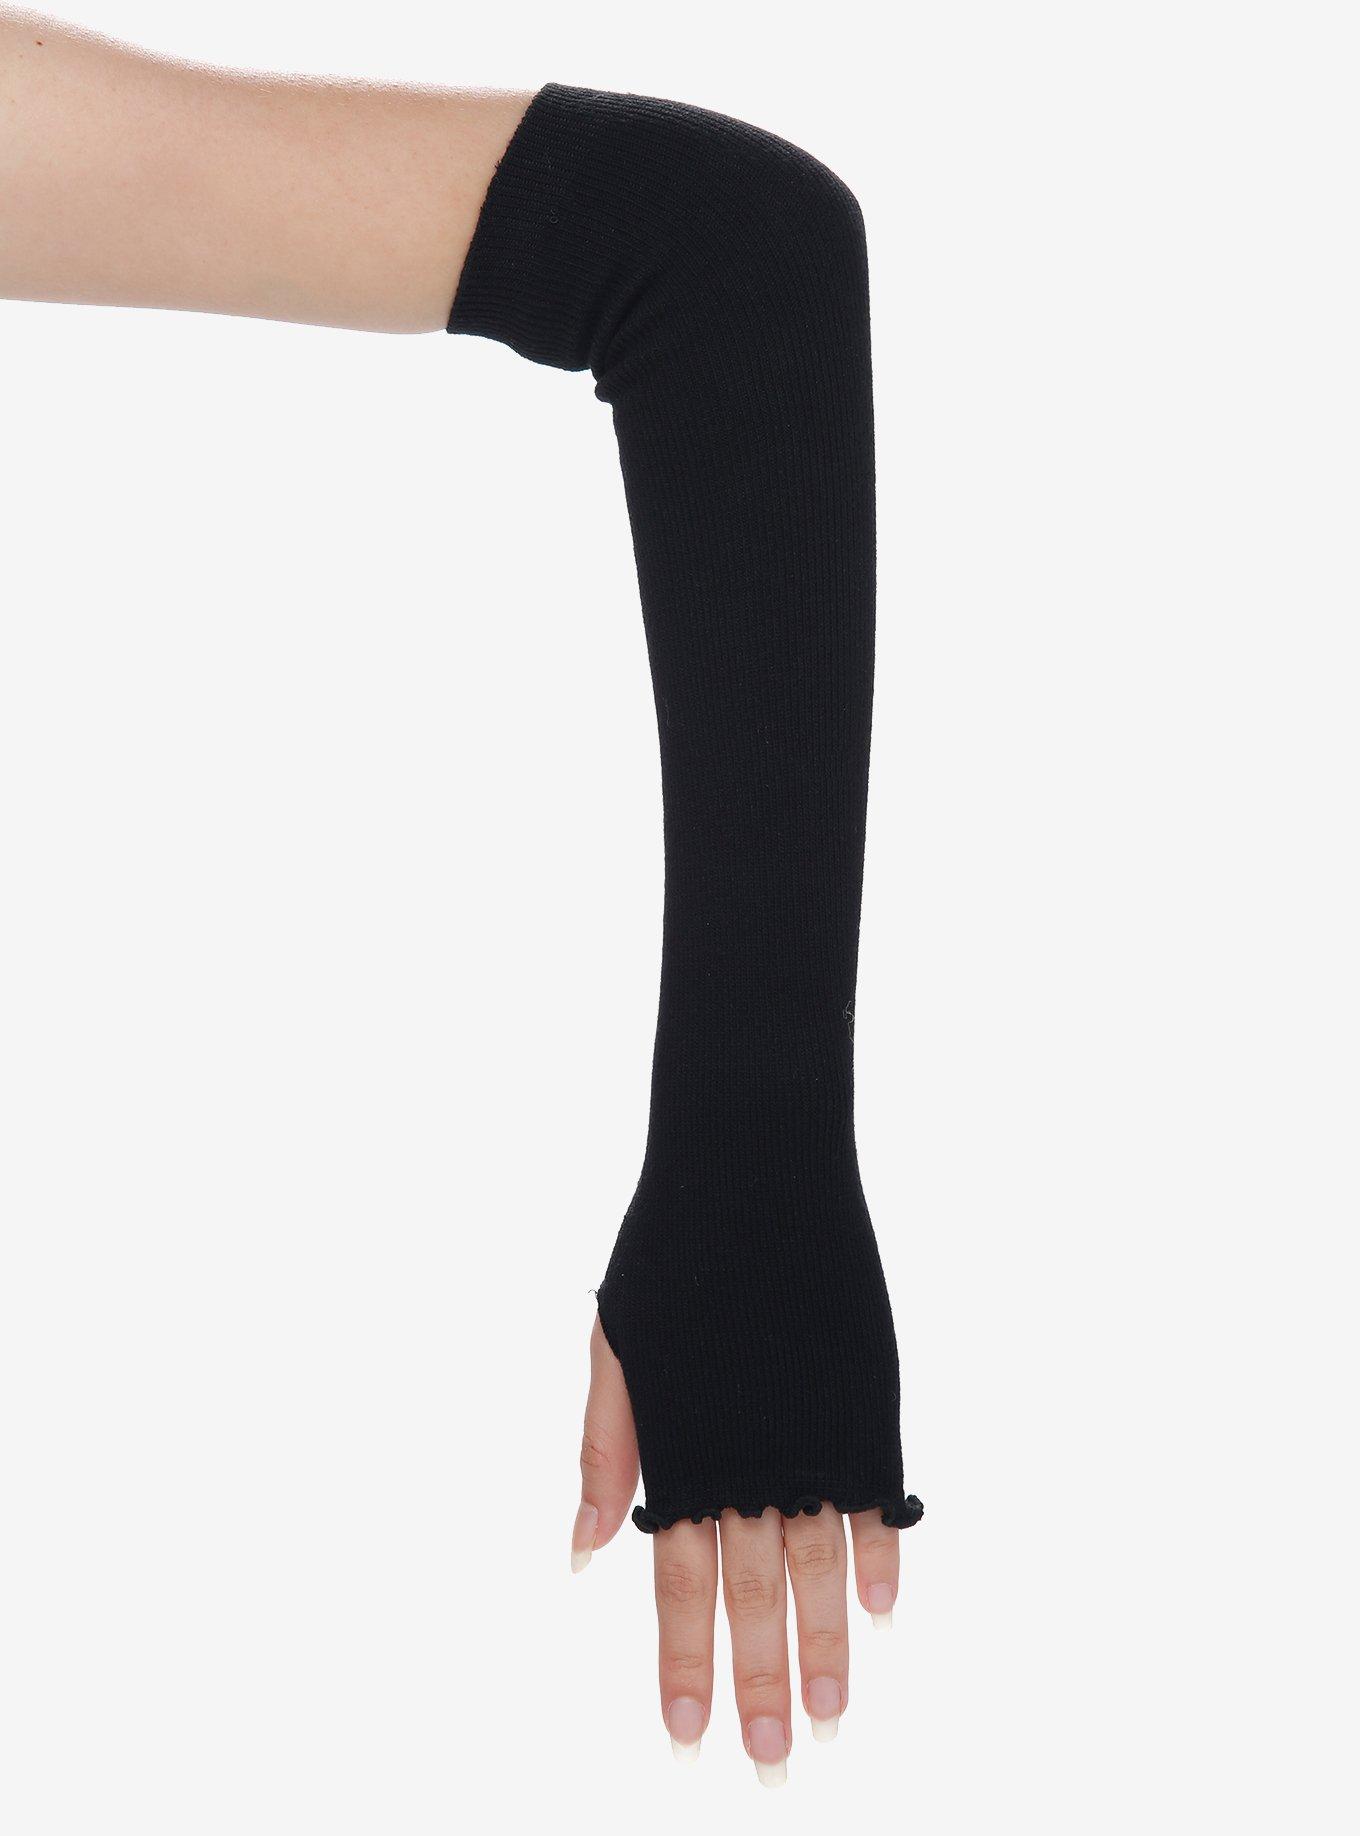 Black Lettuce Trim Ribbed Arm Warmers | Hot Topic